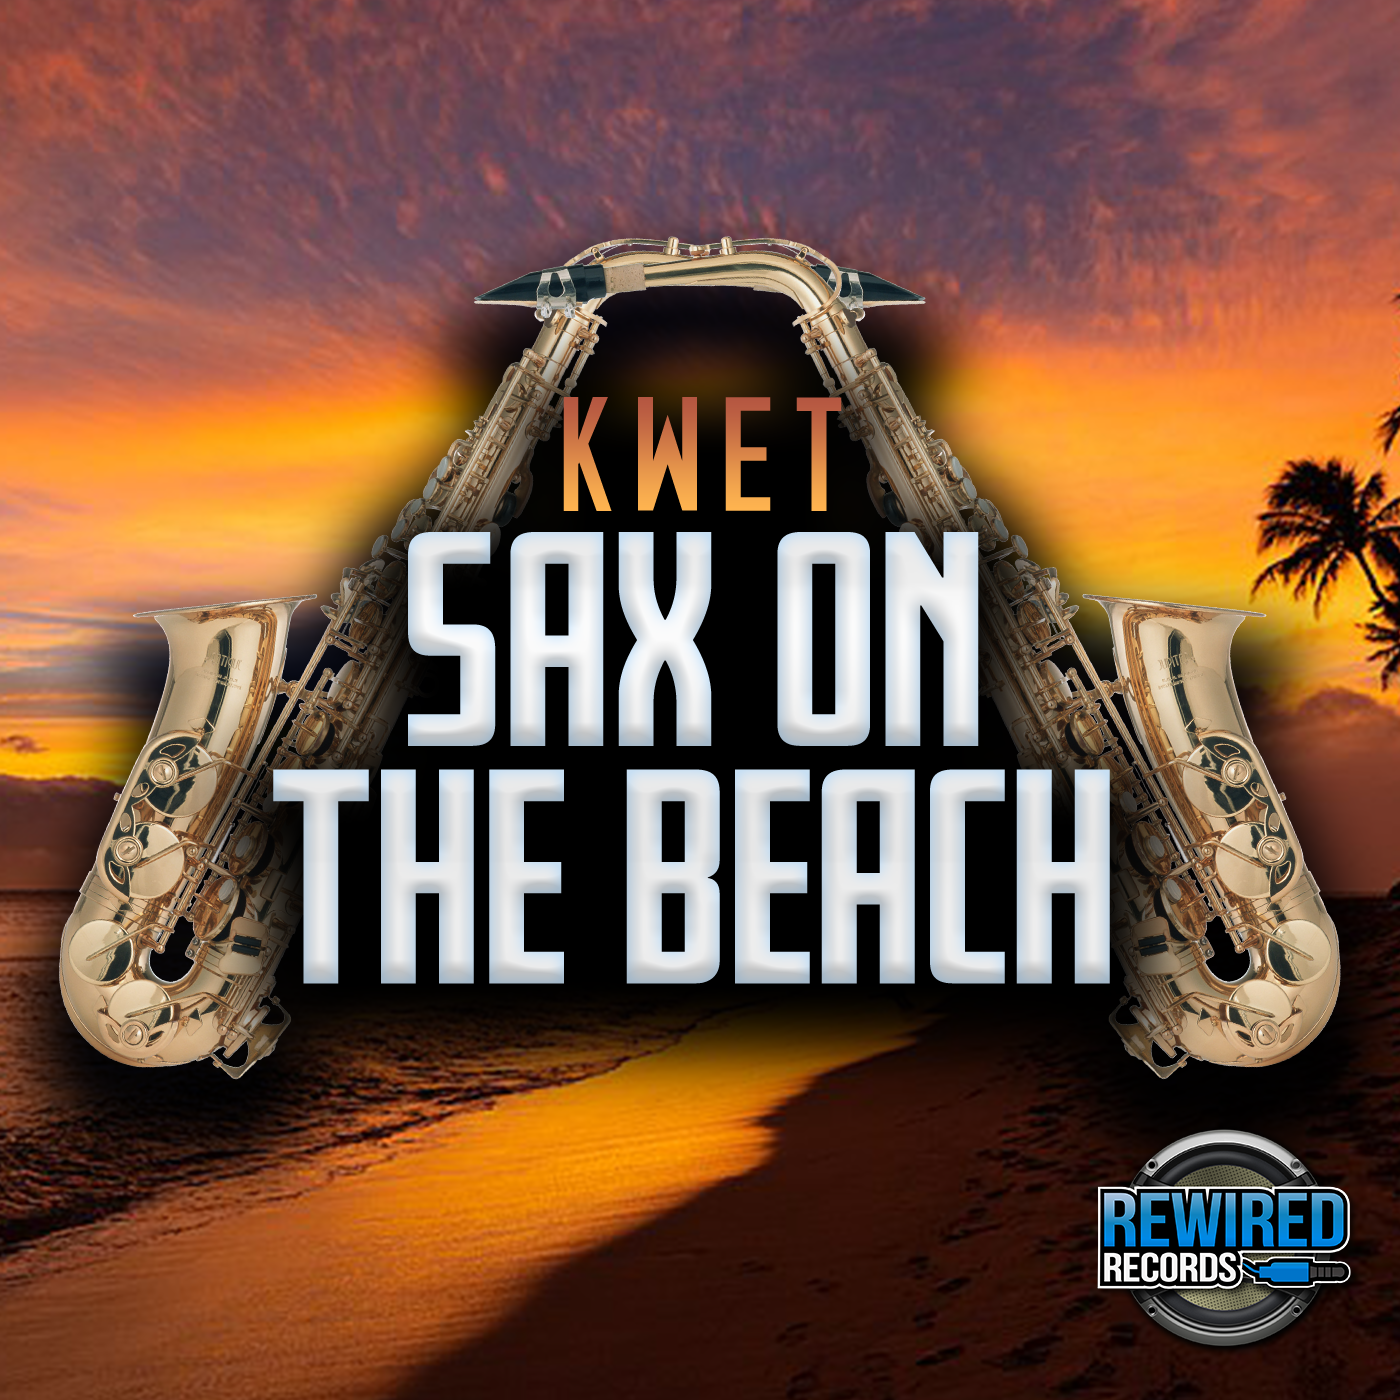 Kwet - Sax On The Beach - Rewired Records